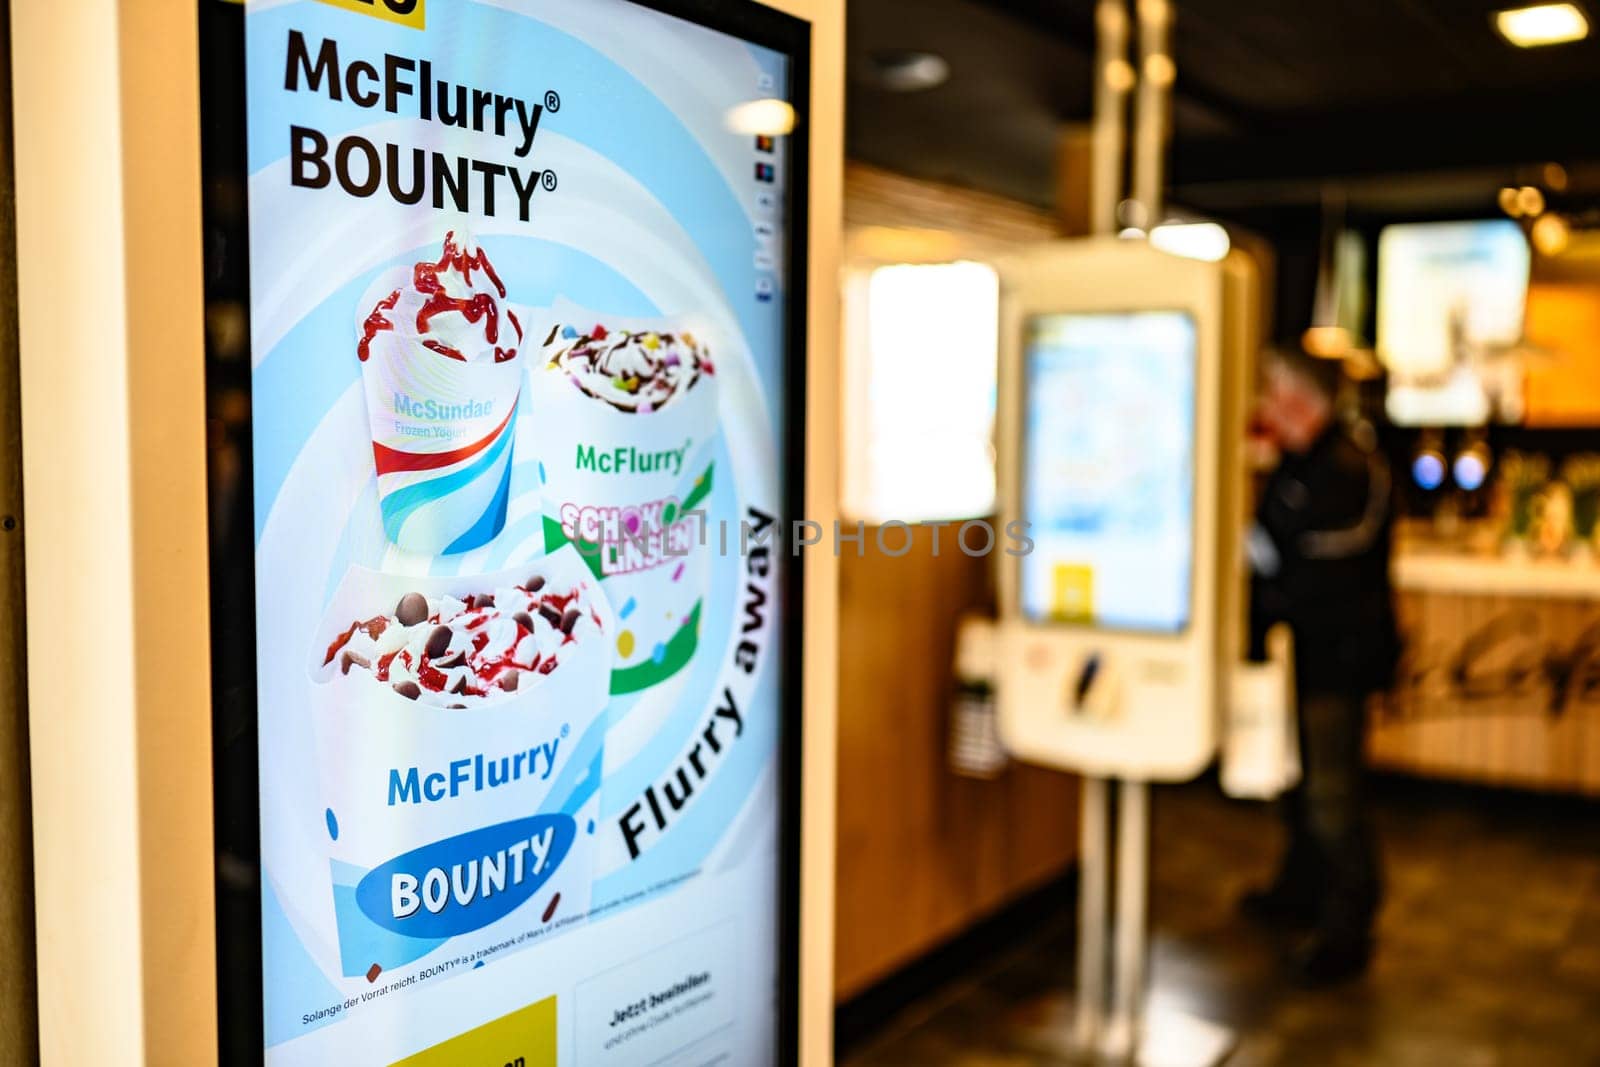 Berlin, Germany - 10 April 2023: self-order counter with advertising inside of restaurant McDonald's